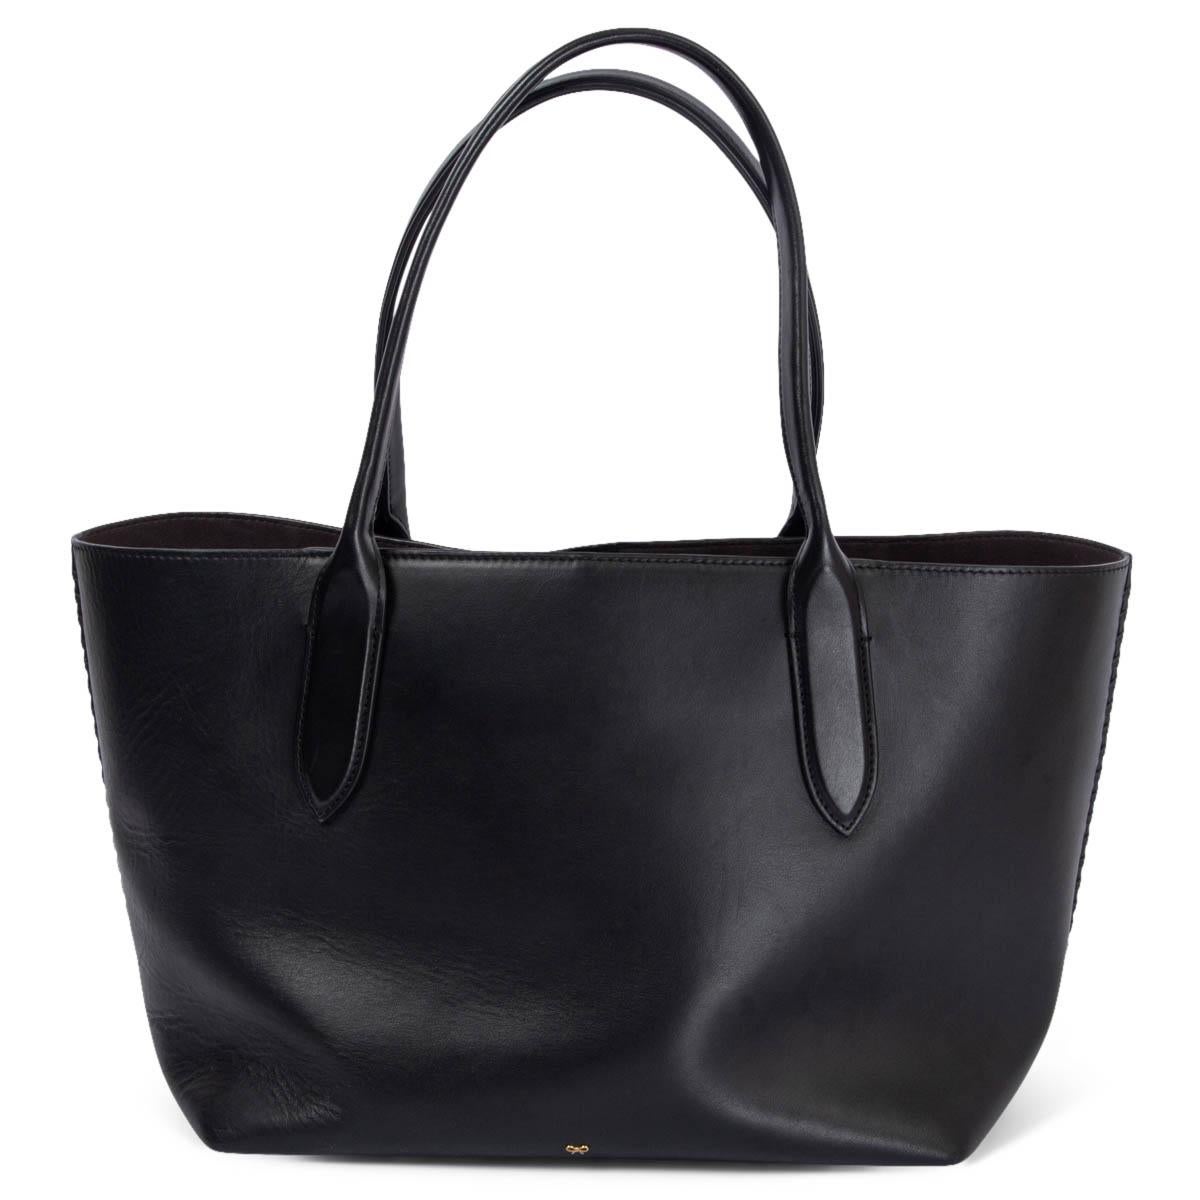 100% authentic Anya Hindmarch tote bag in smooth black calfskin with signature braided bow detail in the middle. Unlined with one sit pocket. Has been carried and shows some soft wear to the corners. 

Measurements
Height	26cm (10.1in)
Width	32cm